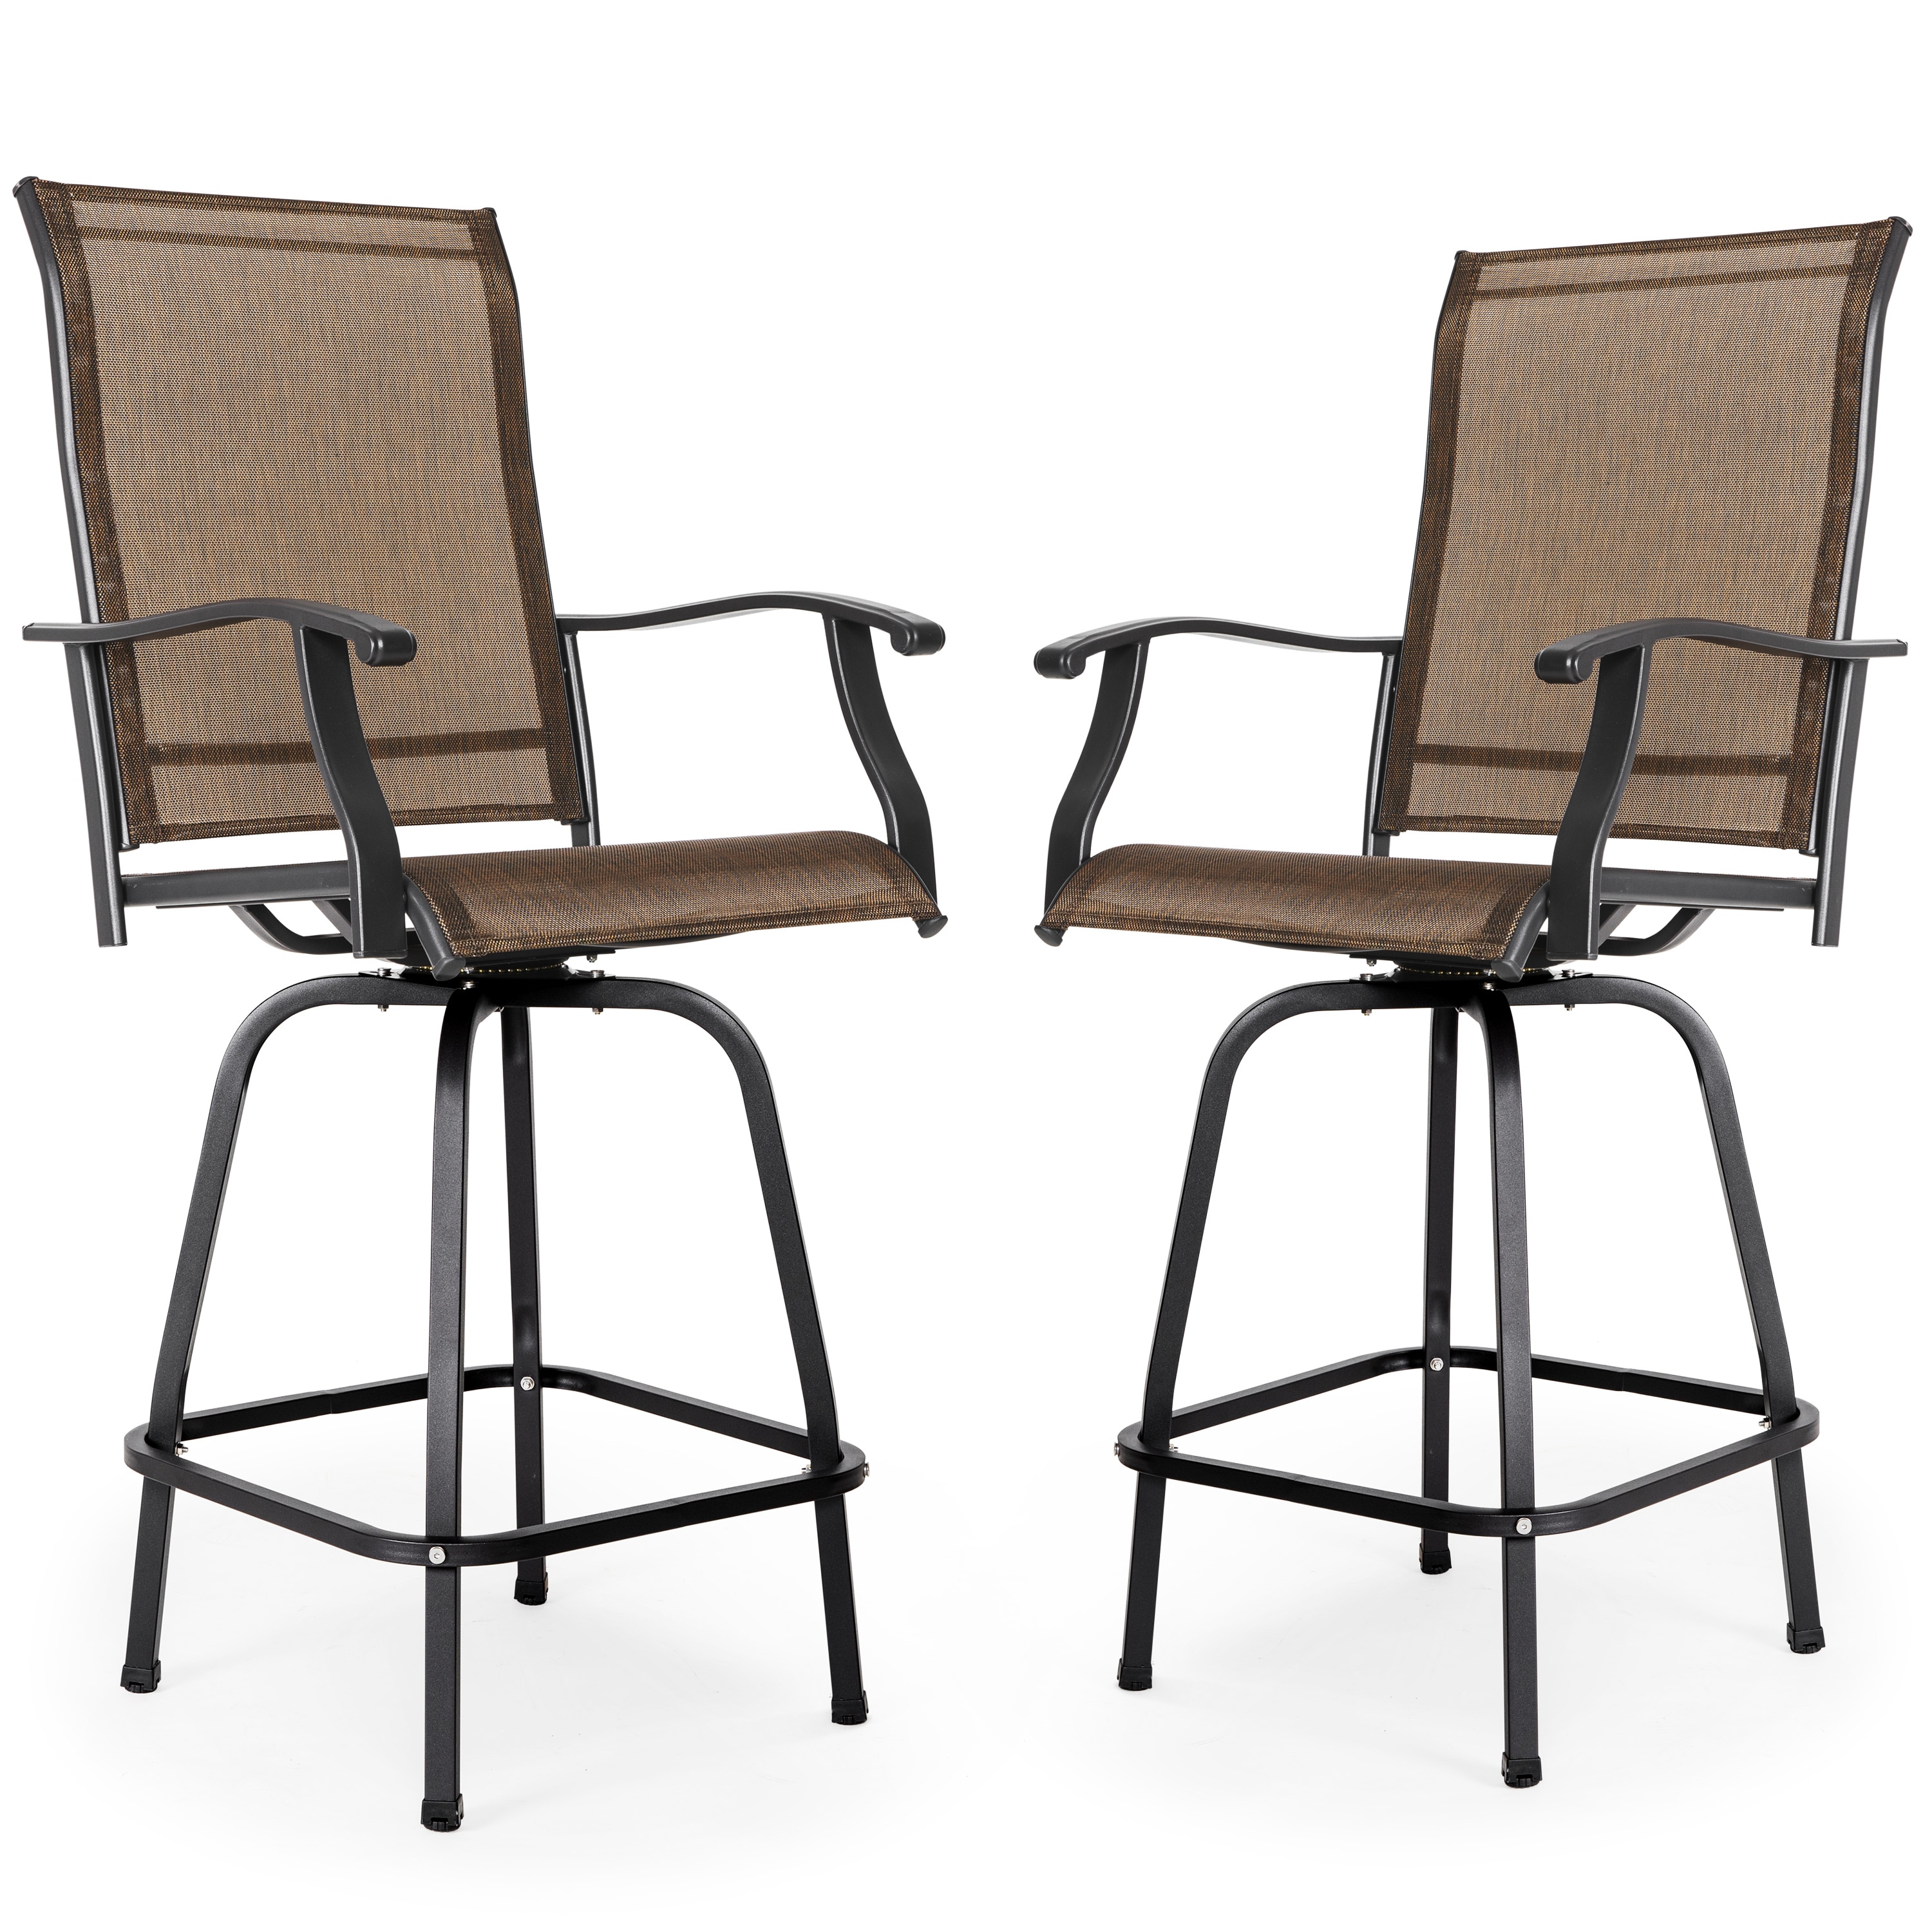 2 Chair Garden 2 PC Swivel Outdoor Patio Bar Set New Padded High Top Outdoor Table and Chairs Set with Thick Waterproof Cotton Outdoor Swivel Bar Stools and Bar Table Set for Backyard 